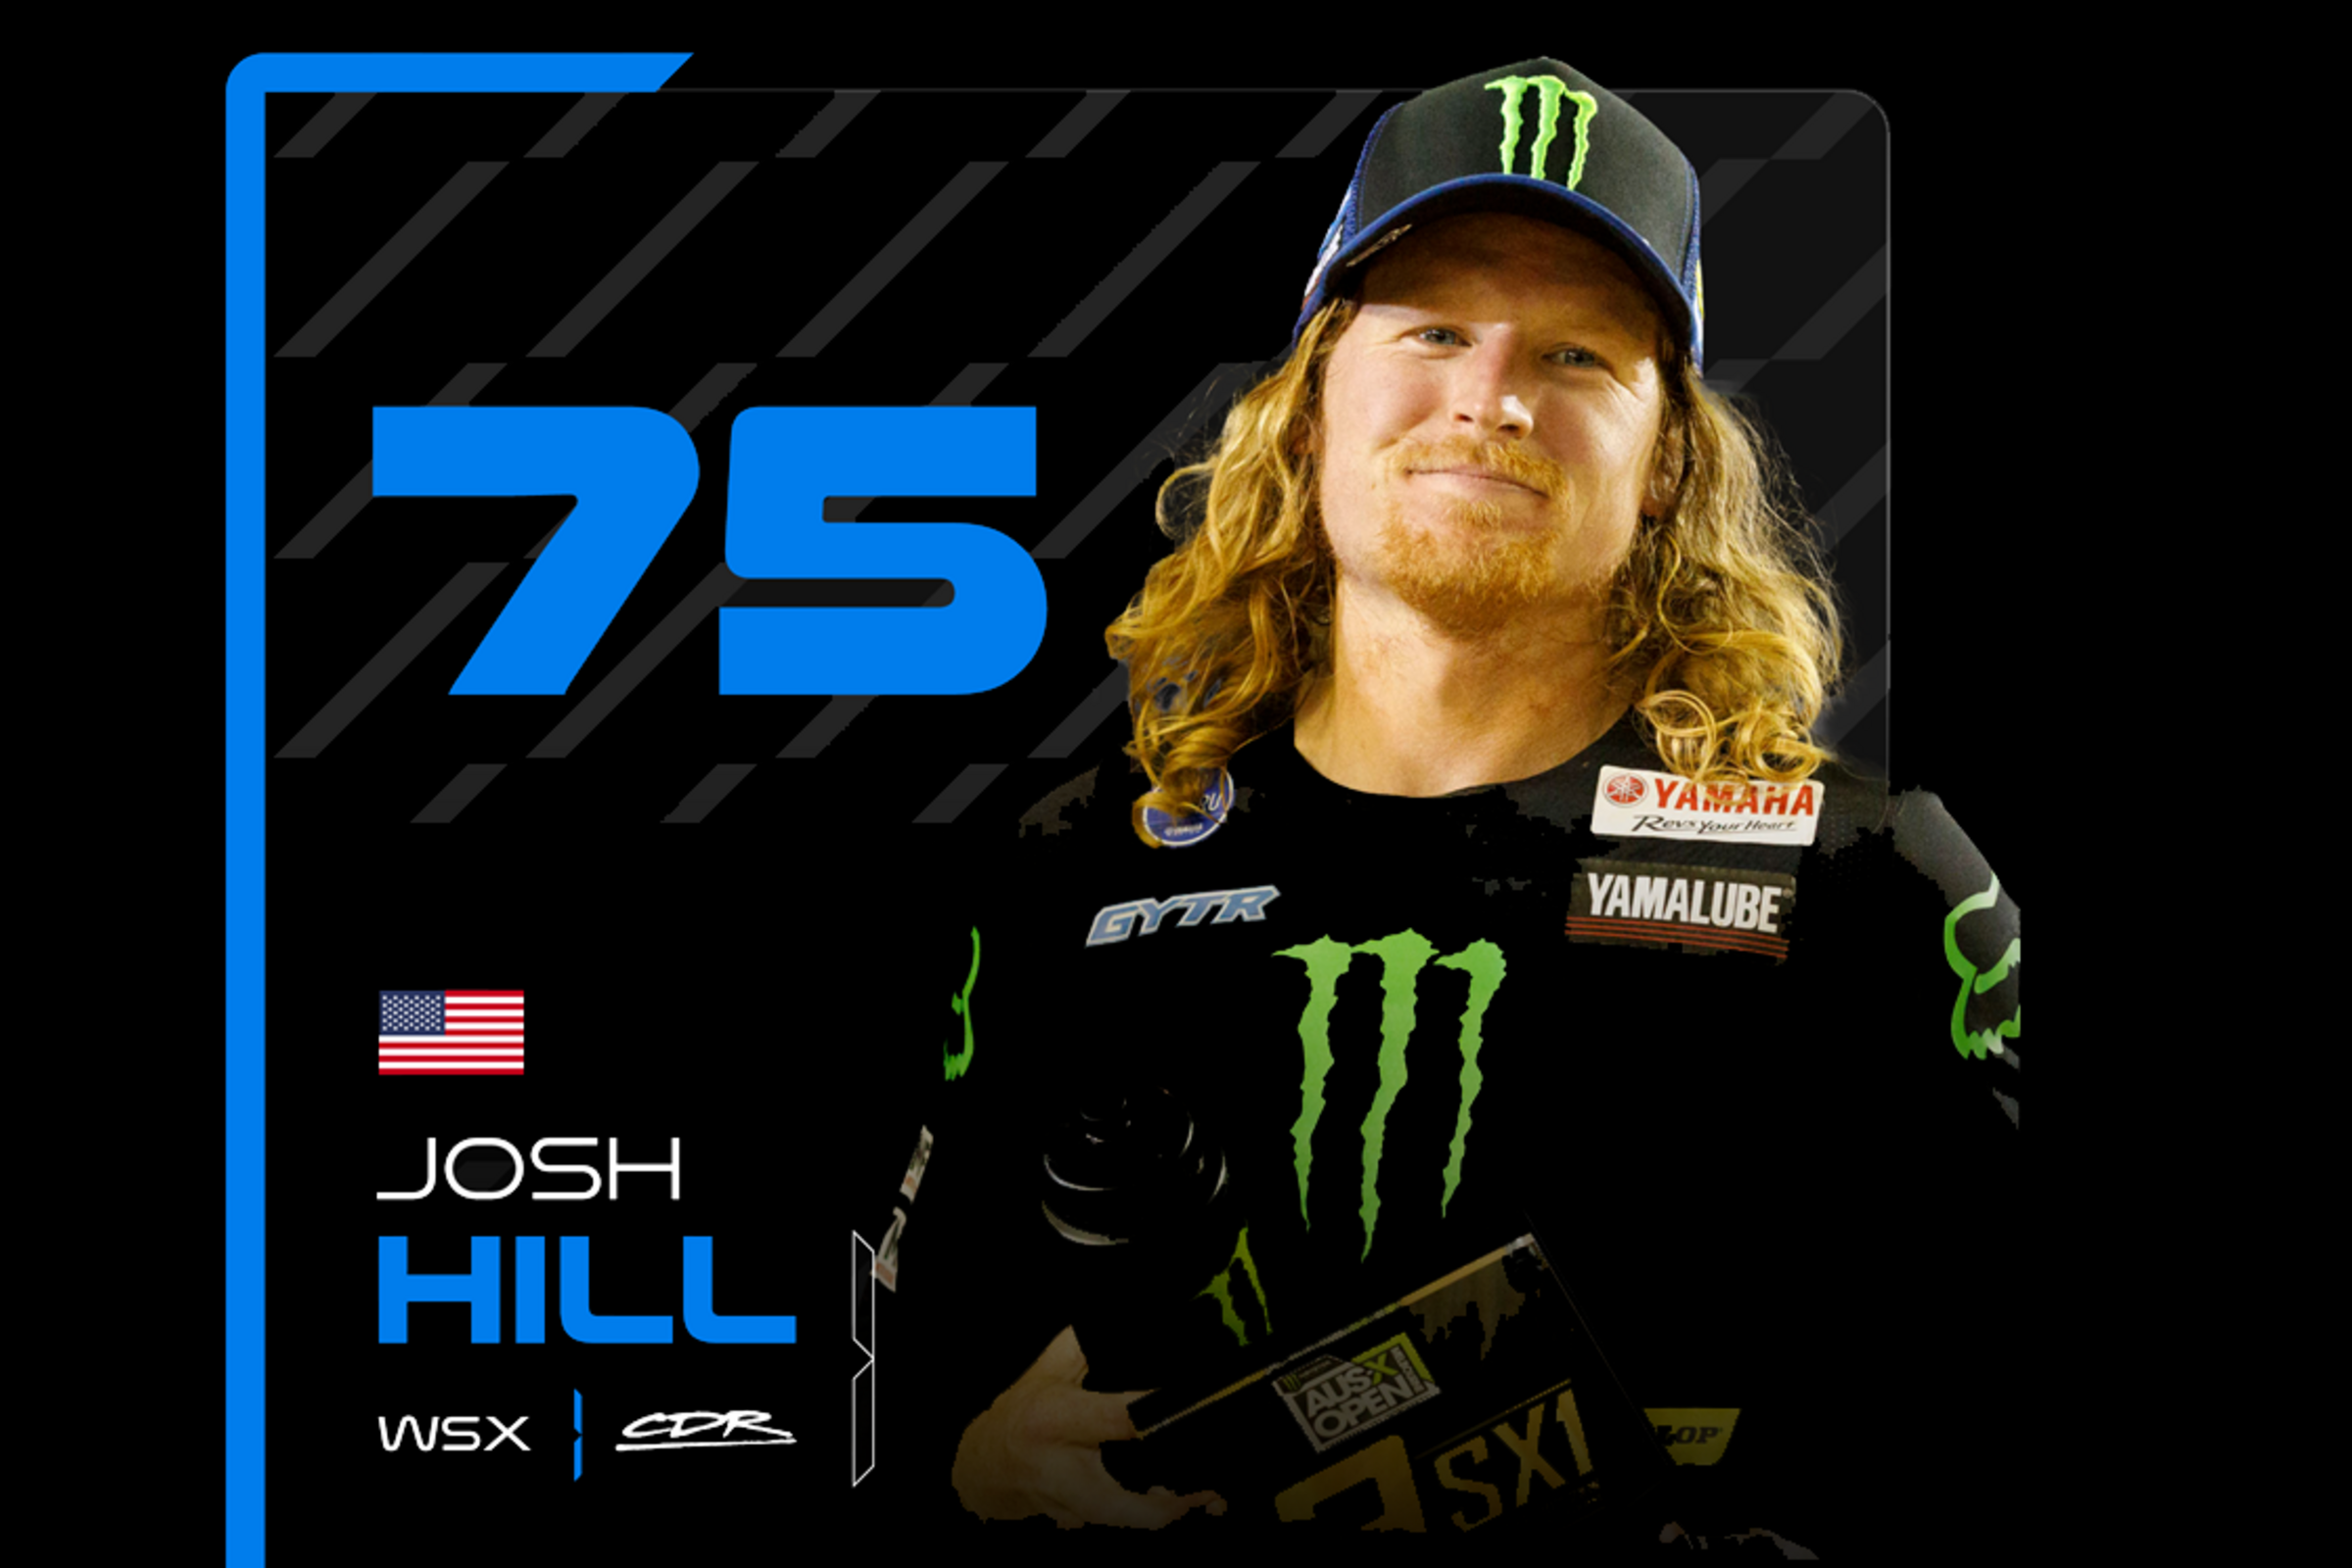 Josh Hill Announced As Fourth CDR Rider In FIM World Supercross